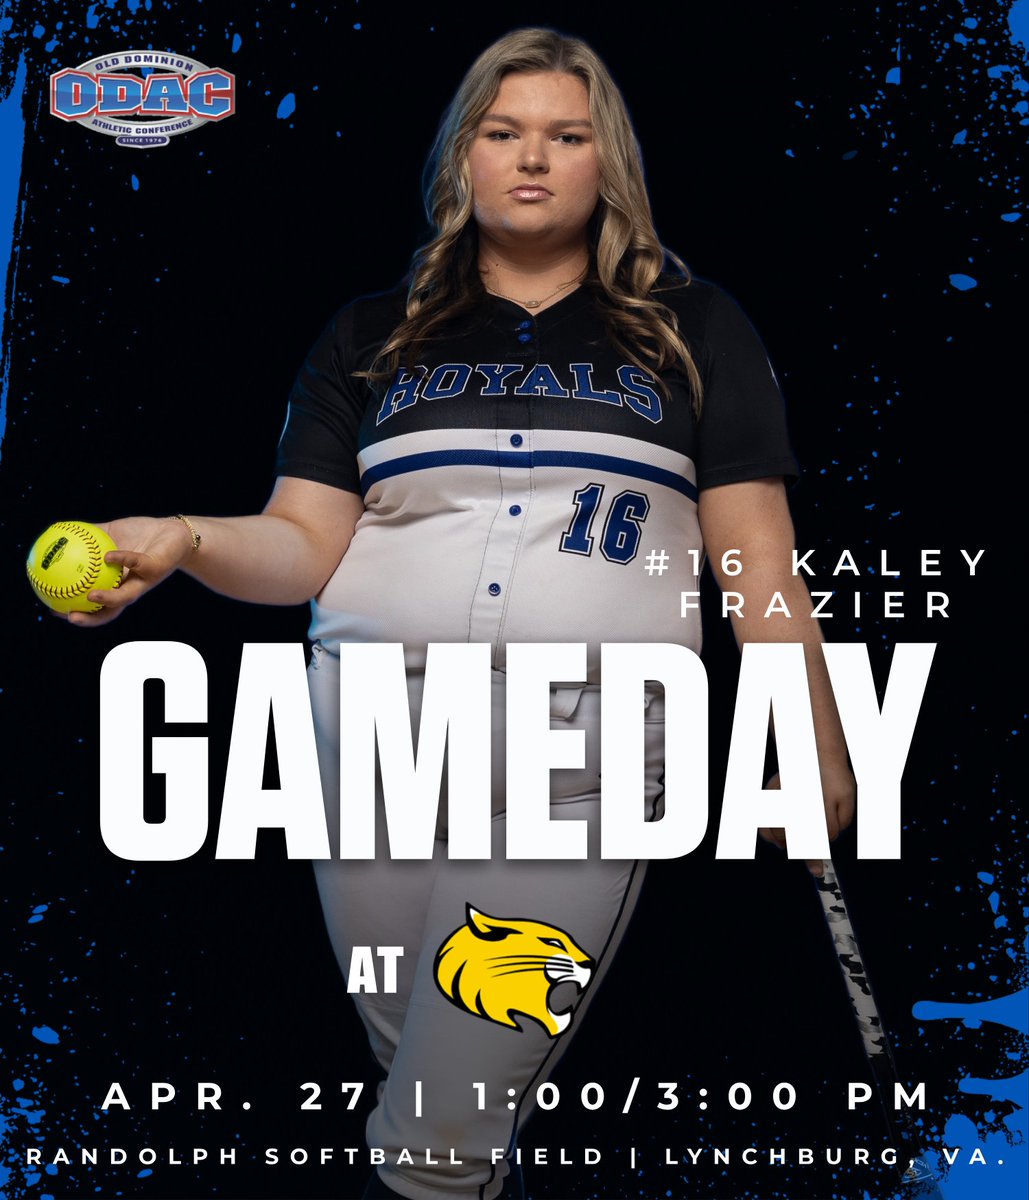 It's 𝐆𝐀𝐌𝐄𝐃𝐀𝐘 for @SoftballEMU as they get set for their 𝐑𝐄𝐆𝐔𝐋𝐀𝐑 𝐒𝐄𝐀𝐒𝐎𝐍 𝐅𝐈𝐍𝐀𝐋𝐄! 🆚: @TrackTheCats ⏰: 1/3 pm (DH) 📍: Lynchburg, Va. 🏟️: Randolph Softball Field 📊: bit.ly/3w9QXps 💻: bit.ly/3LvMoaM #CompeteTogether | #RoyalPride